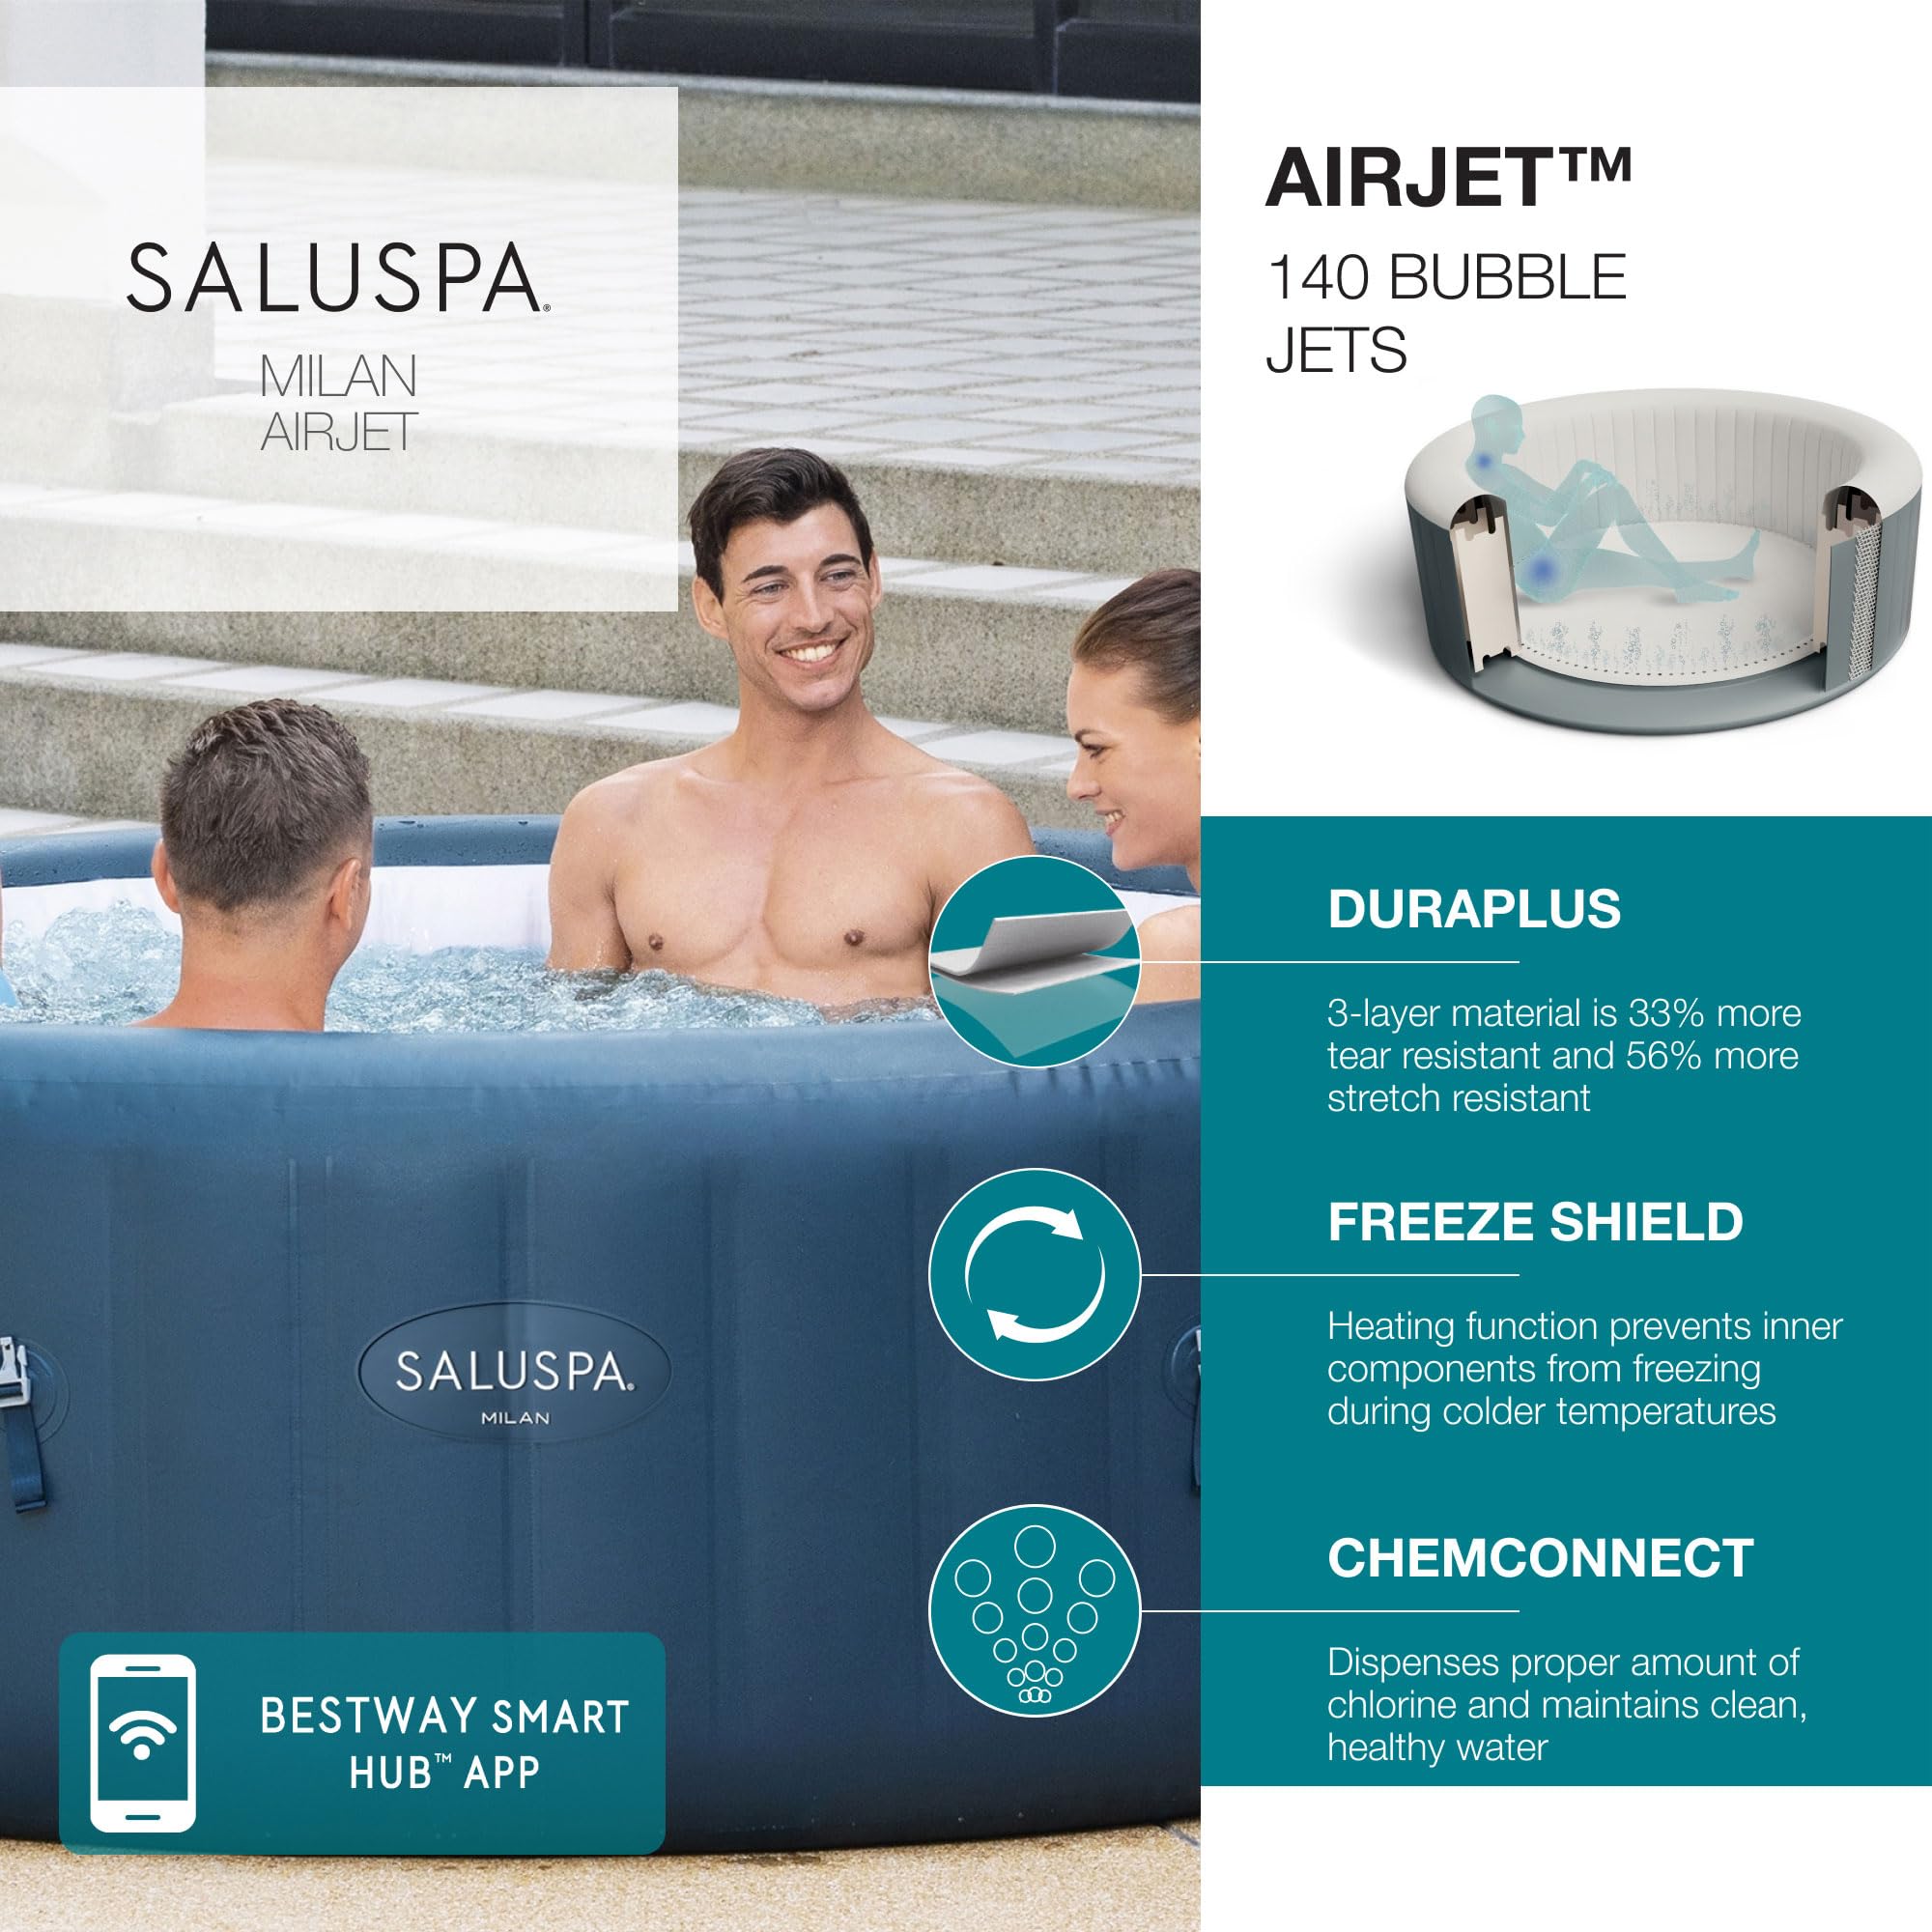 Bestway SaluSpa Milan AirJet Inflatable Hot Tub and 4-Pack of SaluSpa Underwater Non-Slip Spa Seat w/ 4 Adjustable Legs and 2 Padded Headrest Pillows